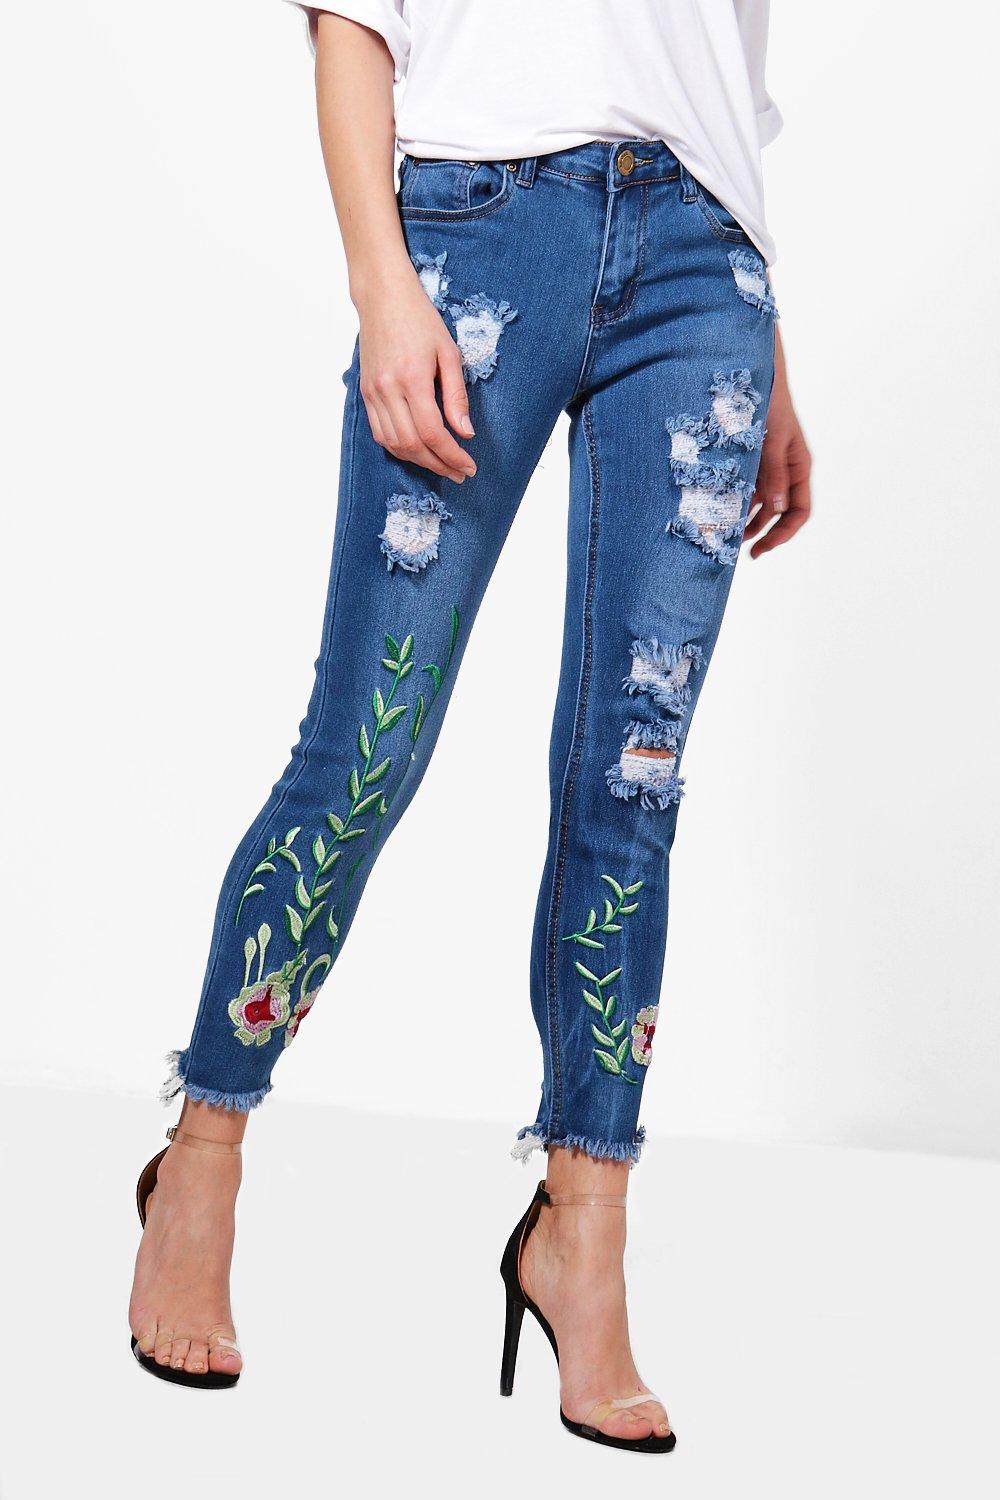 Zena Embroidery Distressed Skinny Jeans at boohoo.com